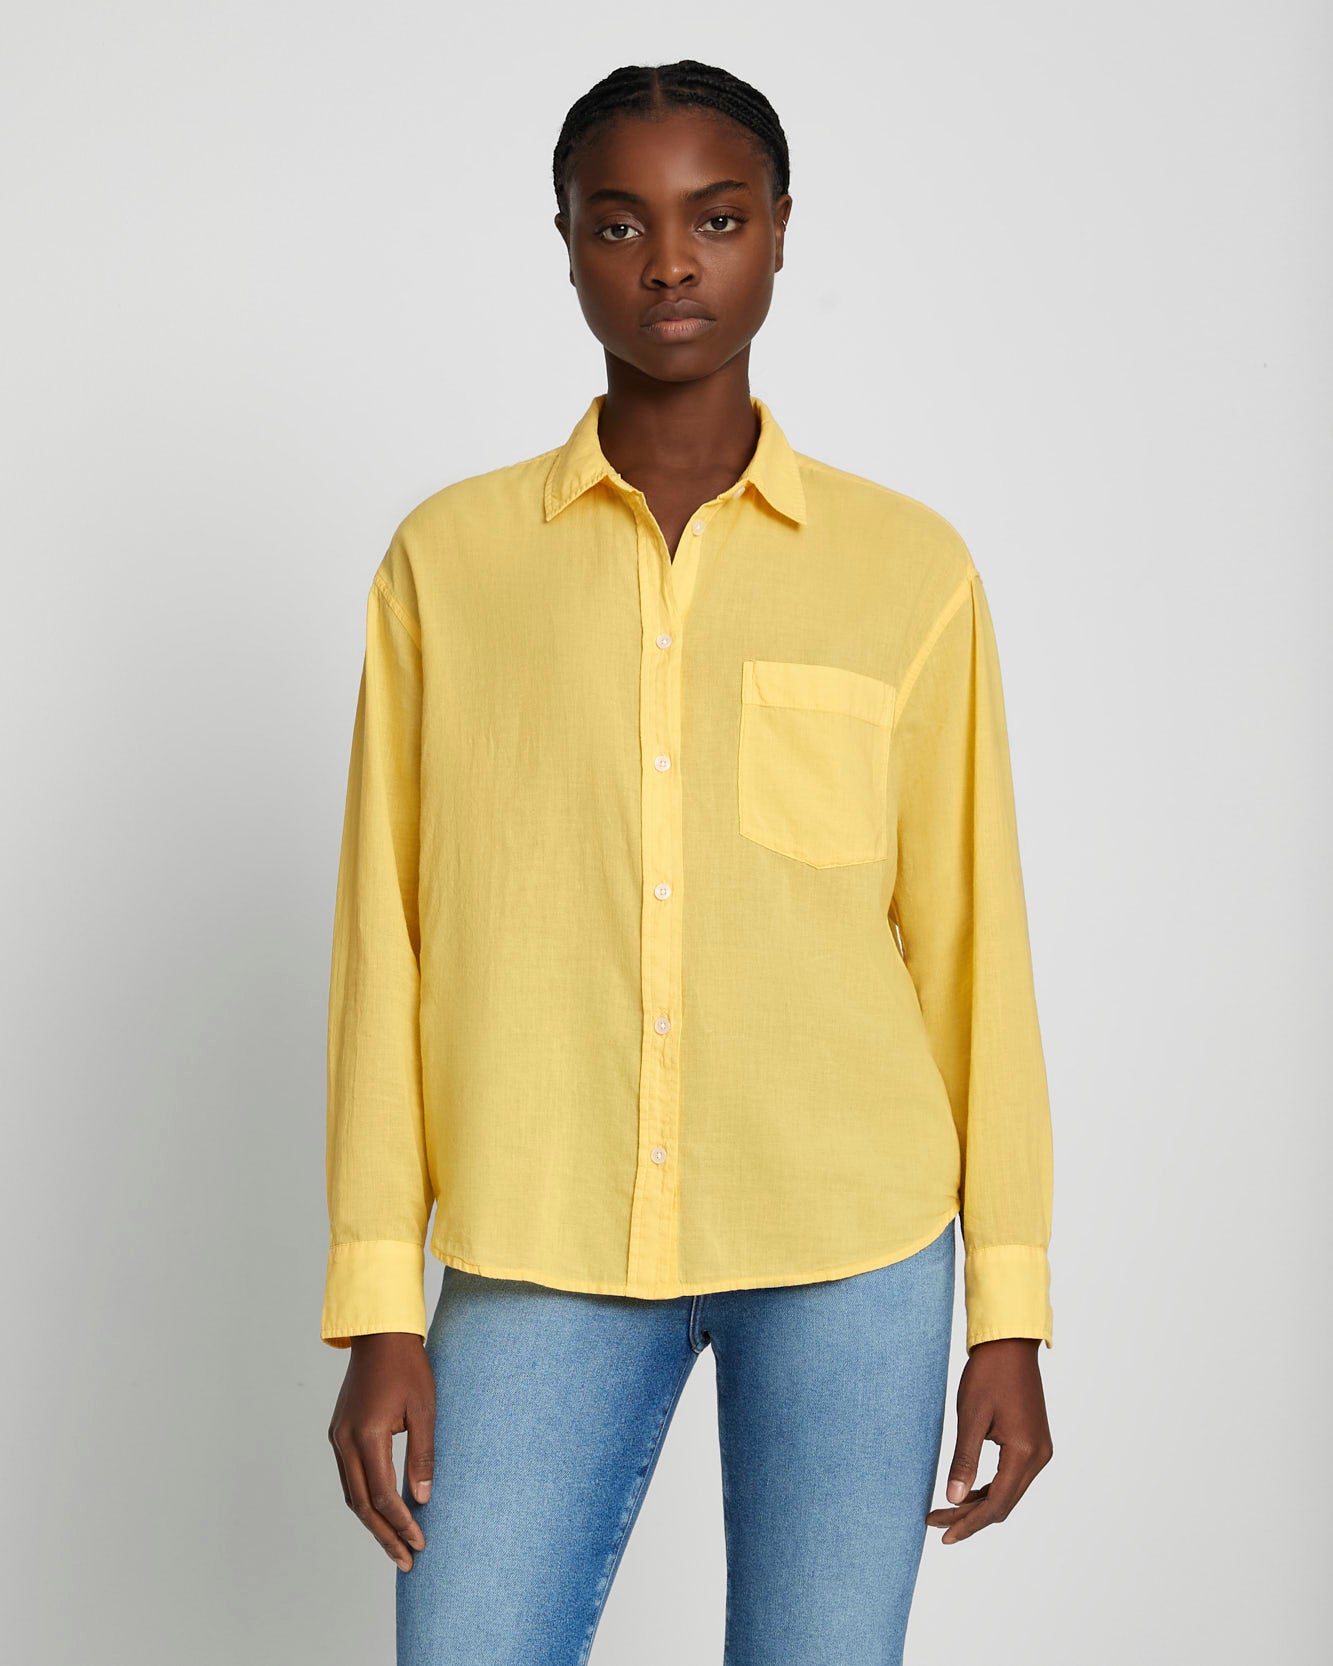 7 For All Mankind Classic Button Up Shirt in Jojoba 7N567C51JOJ